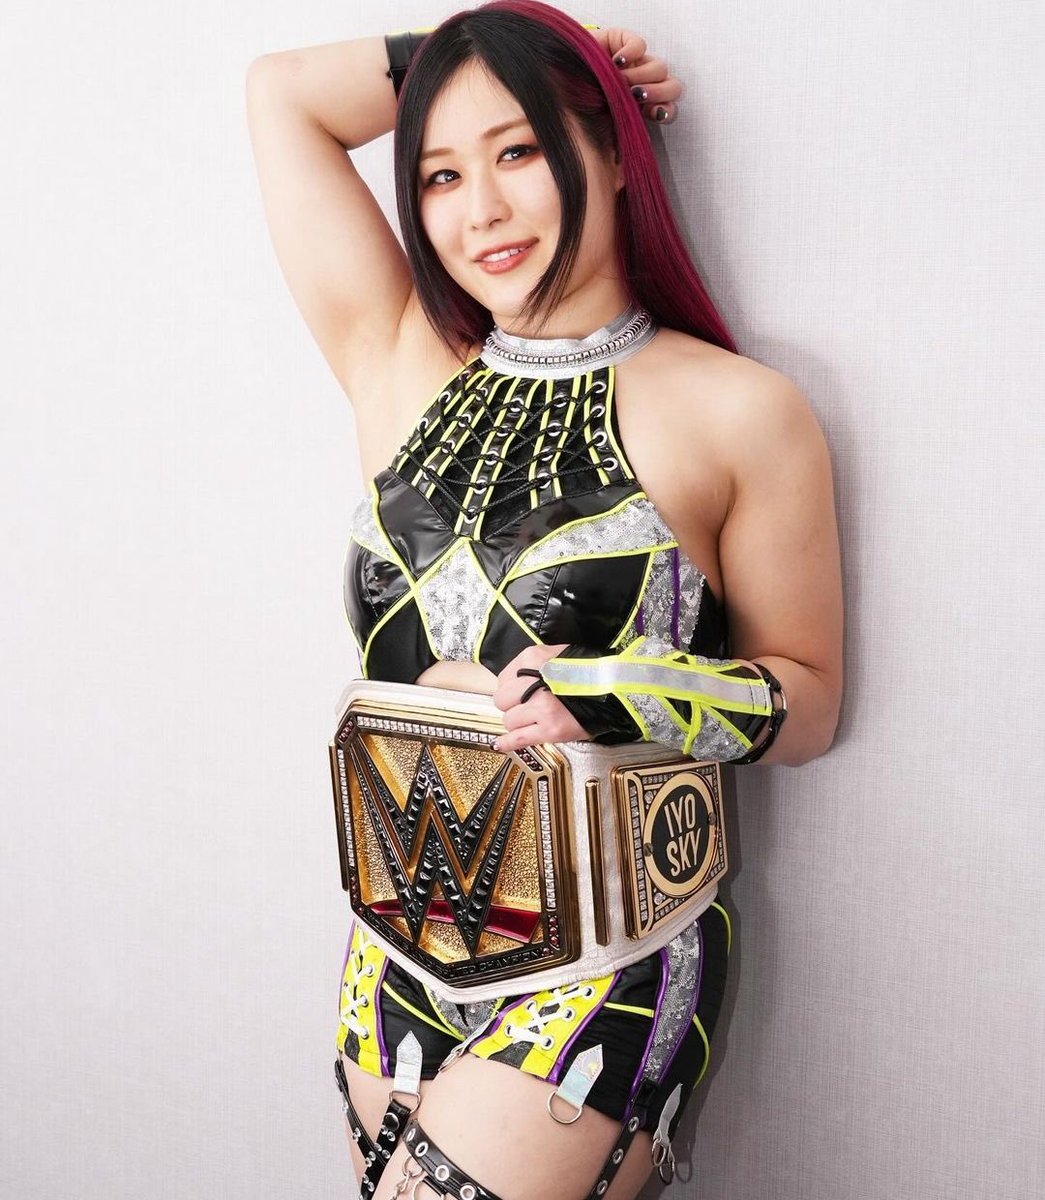 Iyo Sky’s last promo shot with her WWE Women’s Championship. One of the best wrestlers to ever step into the ring. Thank you Iyo 🙏